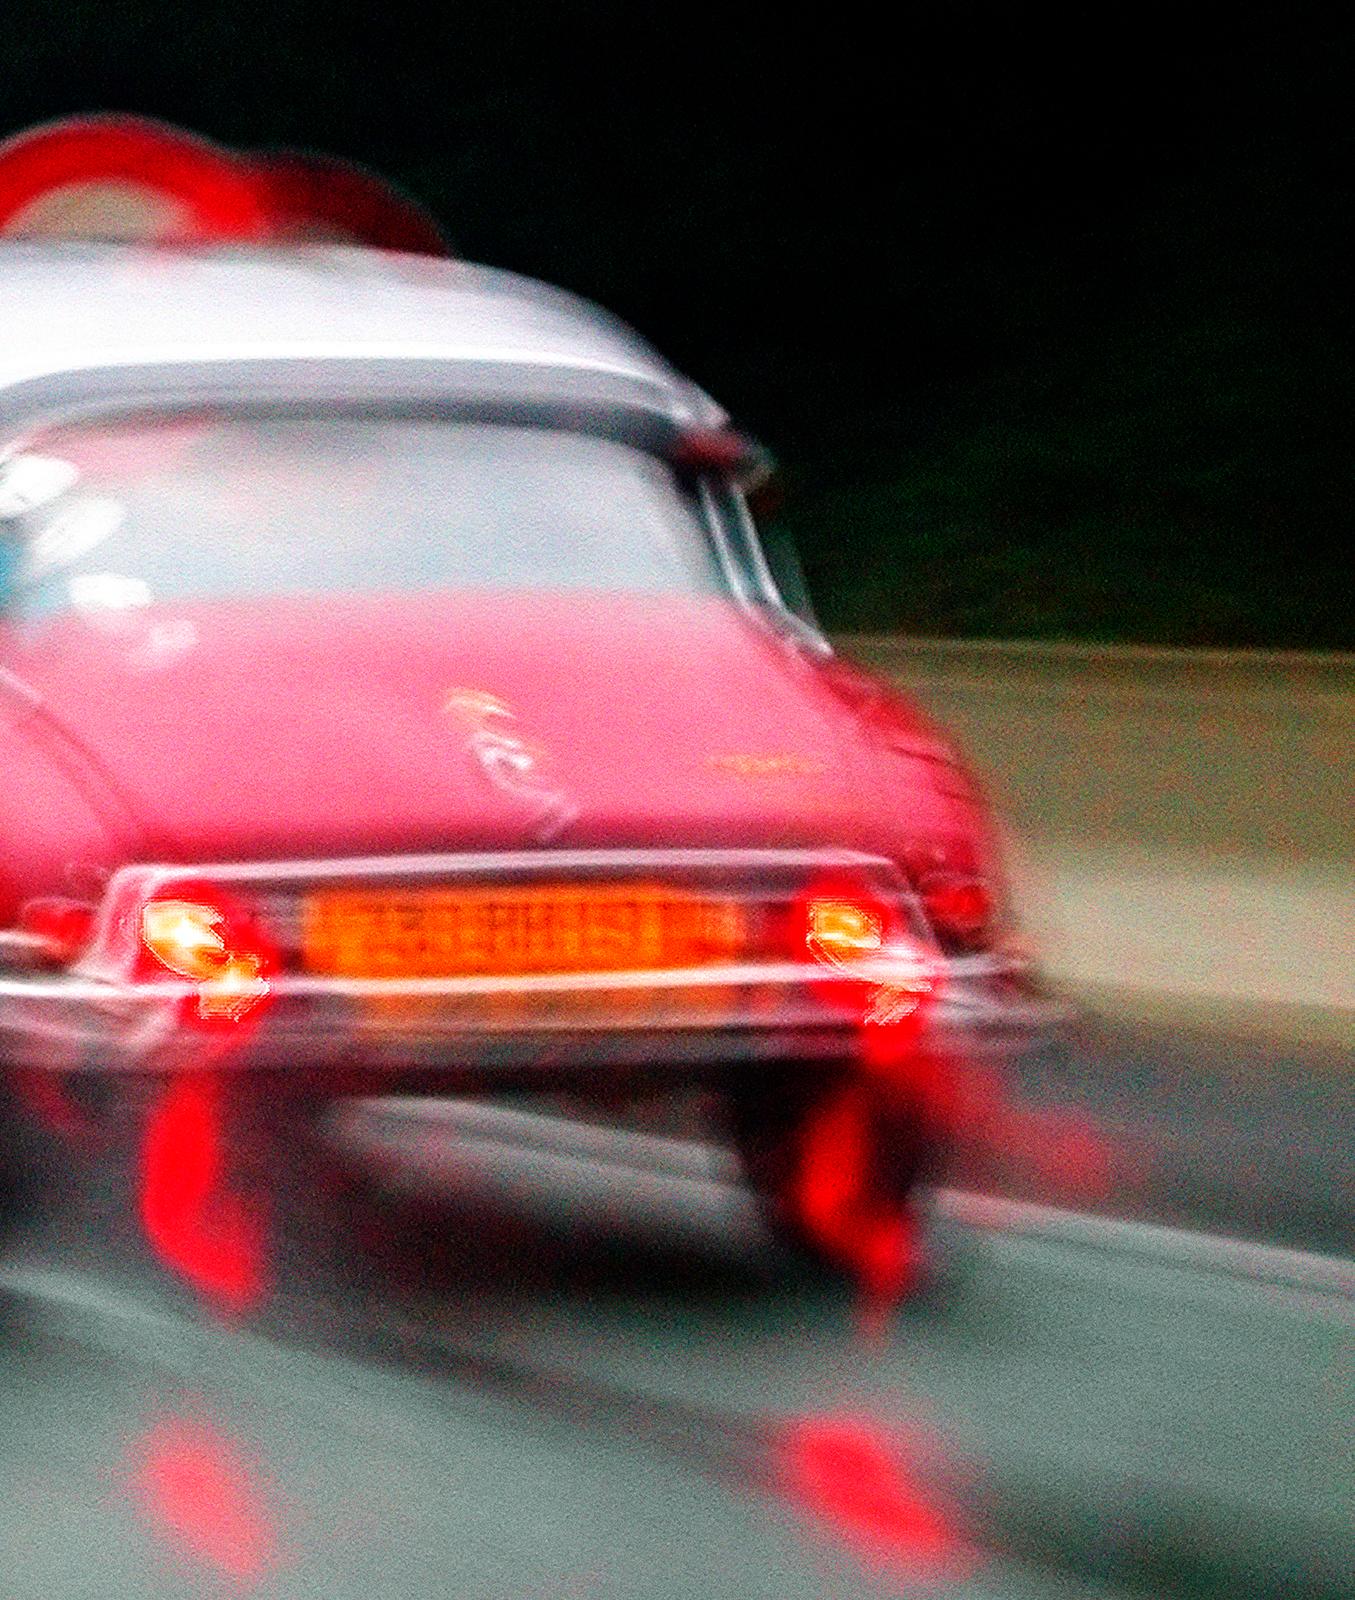 Citroen - Signed limited edition fine art print, Contemporary, Red Car, Transport - Photograph by Ian Sanderson